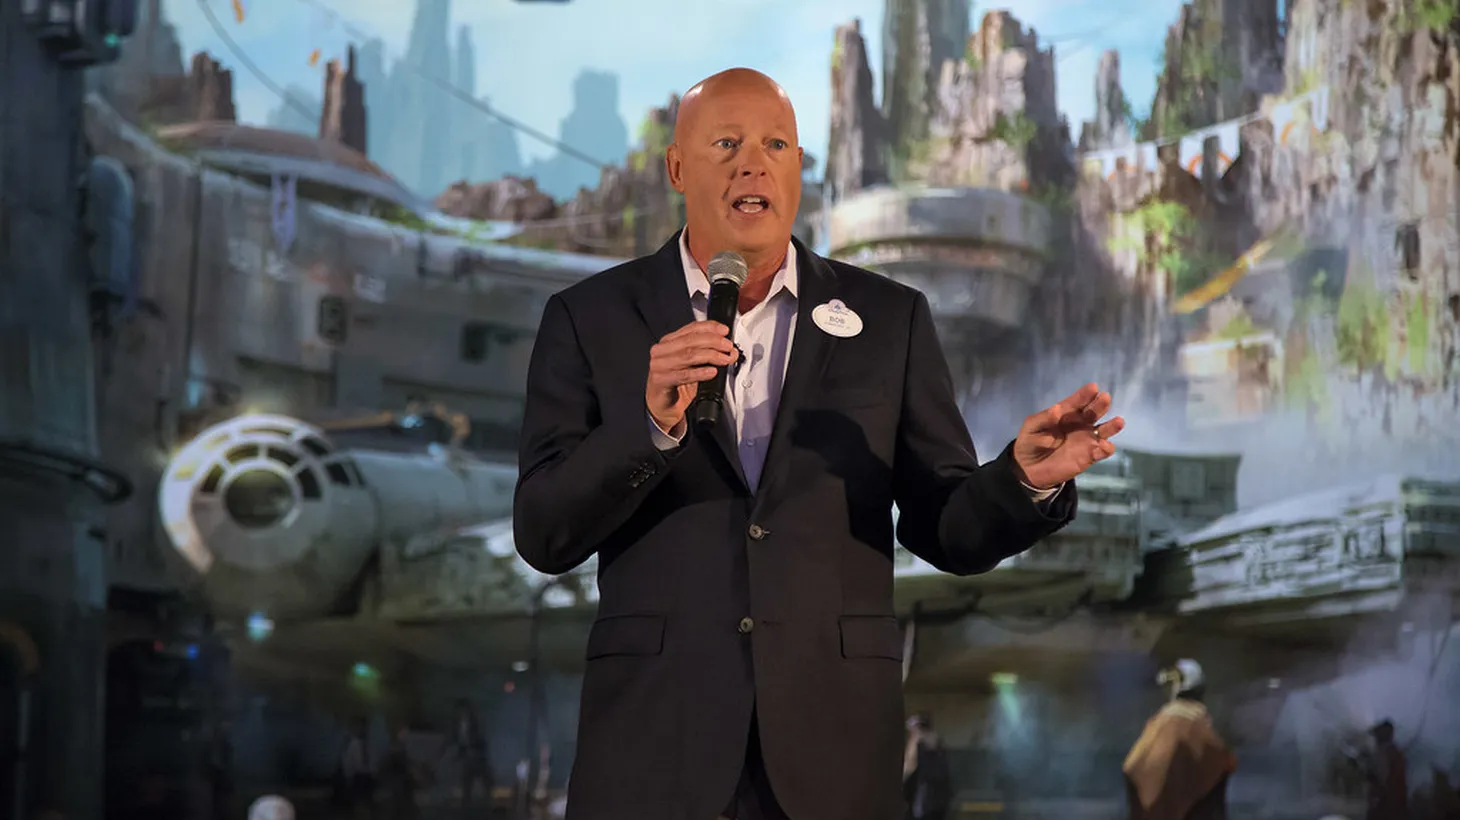 Disney CEO Bob Chapek recently sent his staff a buzzword-laden memo listing three “strategic pillars.” There’s mention of new monthly meetings and focusing on the audience, but nothing about taking creative risks.